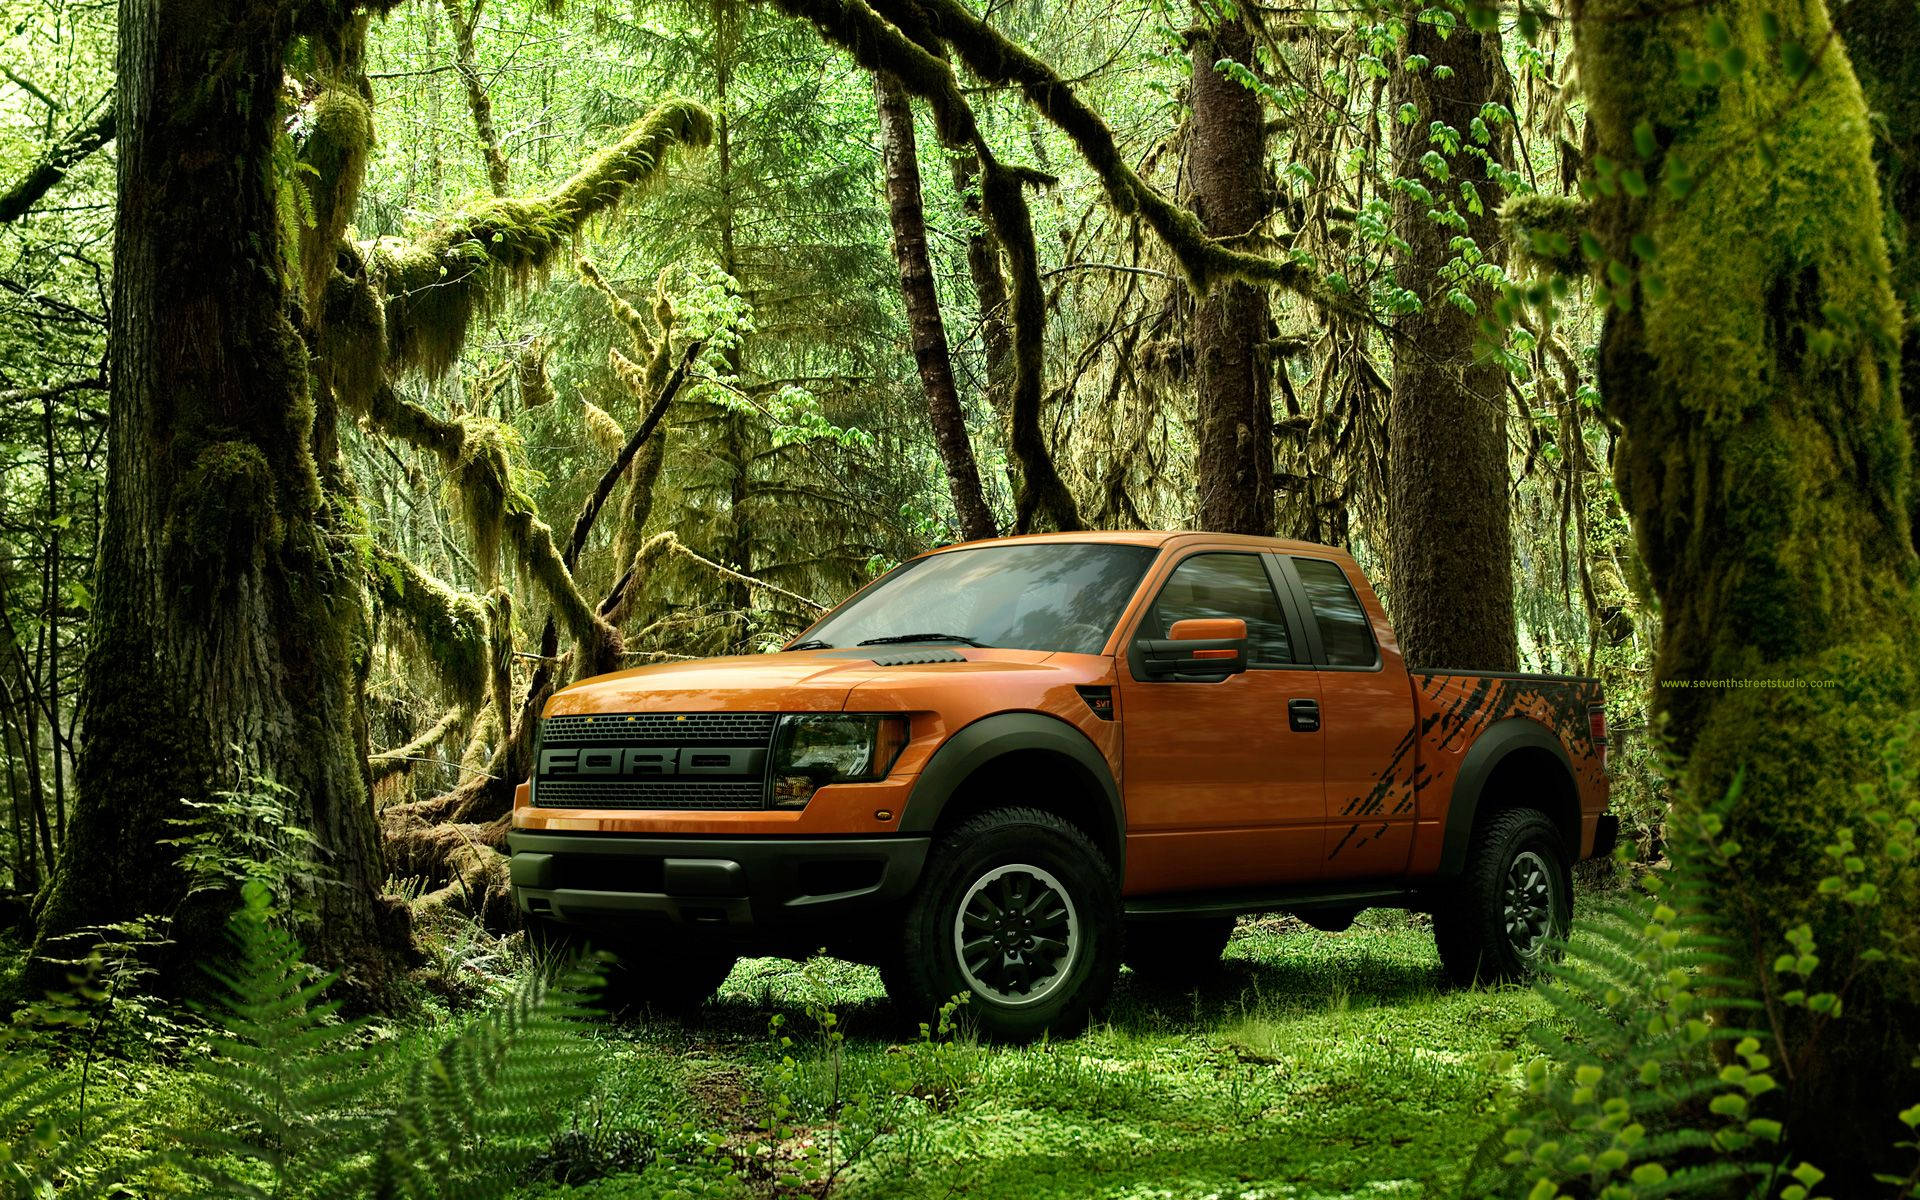 Ford Raptor In Mossy Jungle